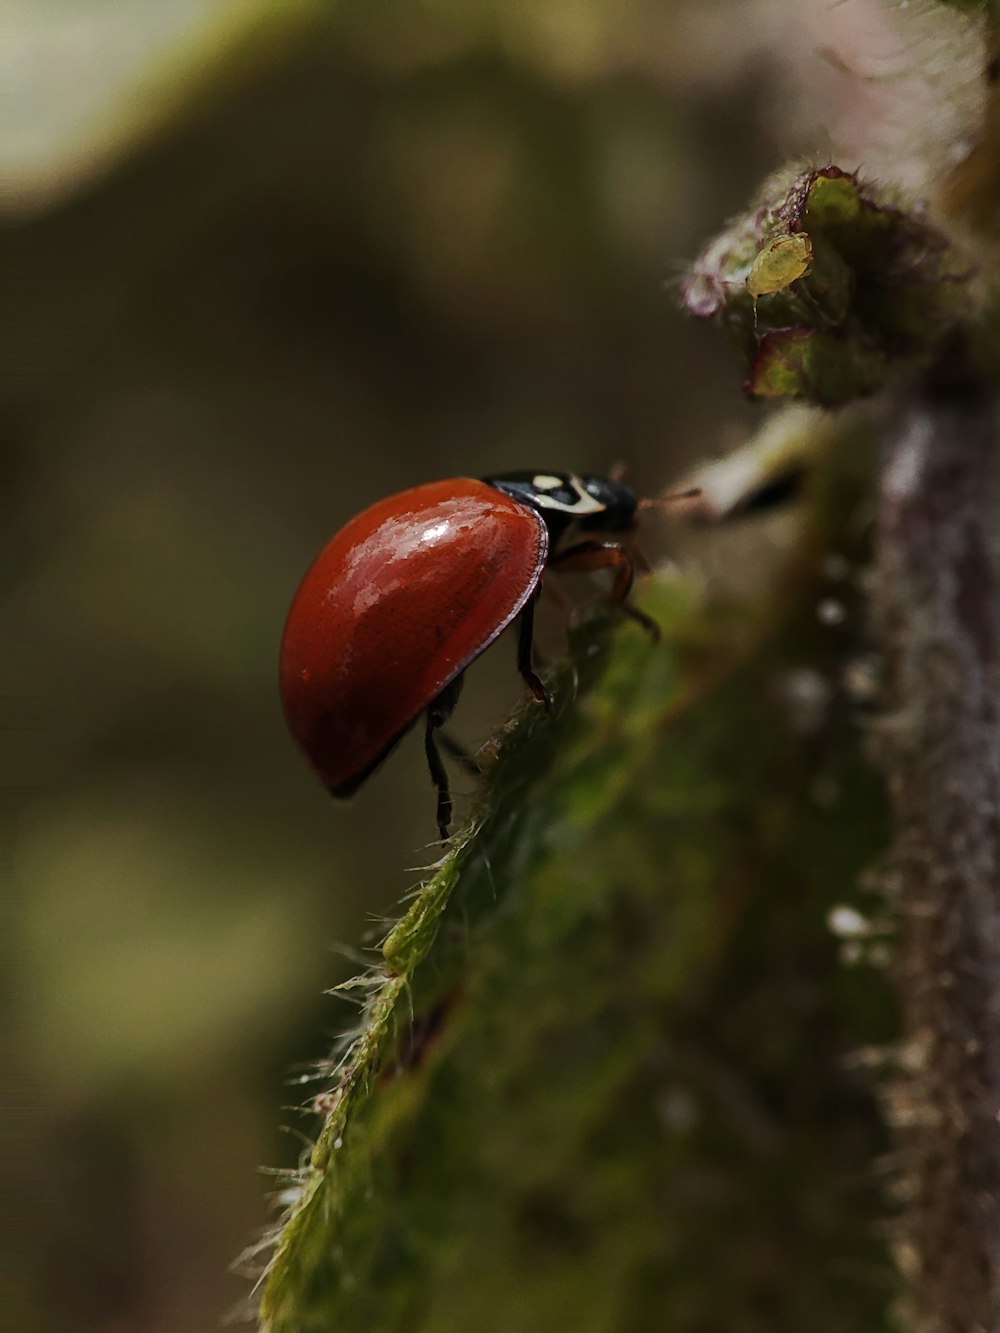 a close up of a red bug on a leaf